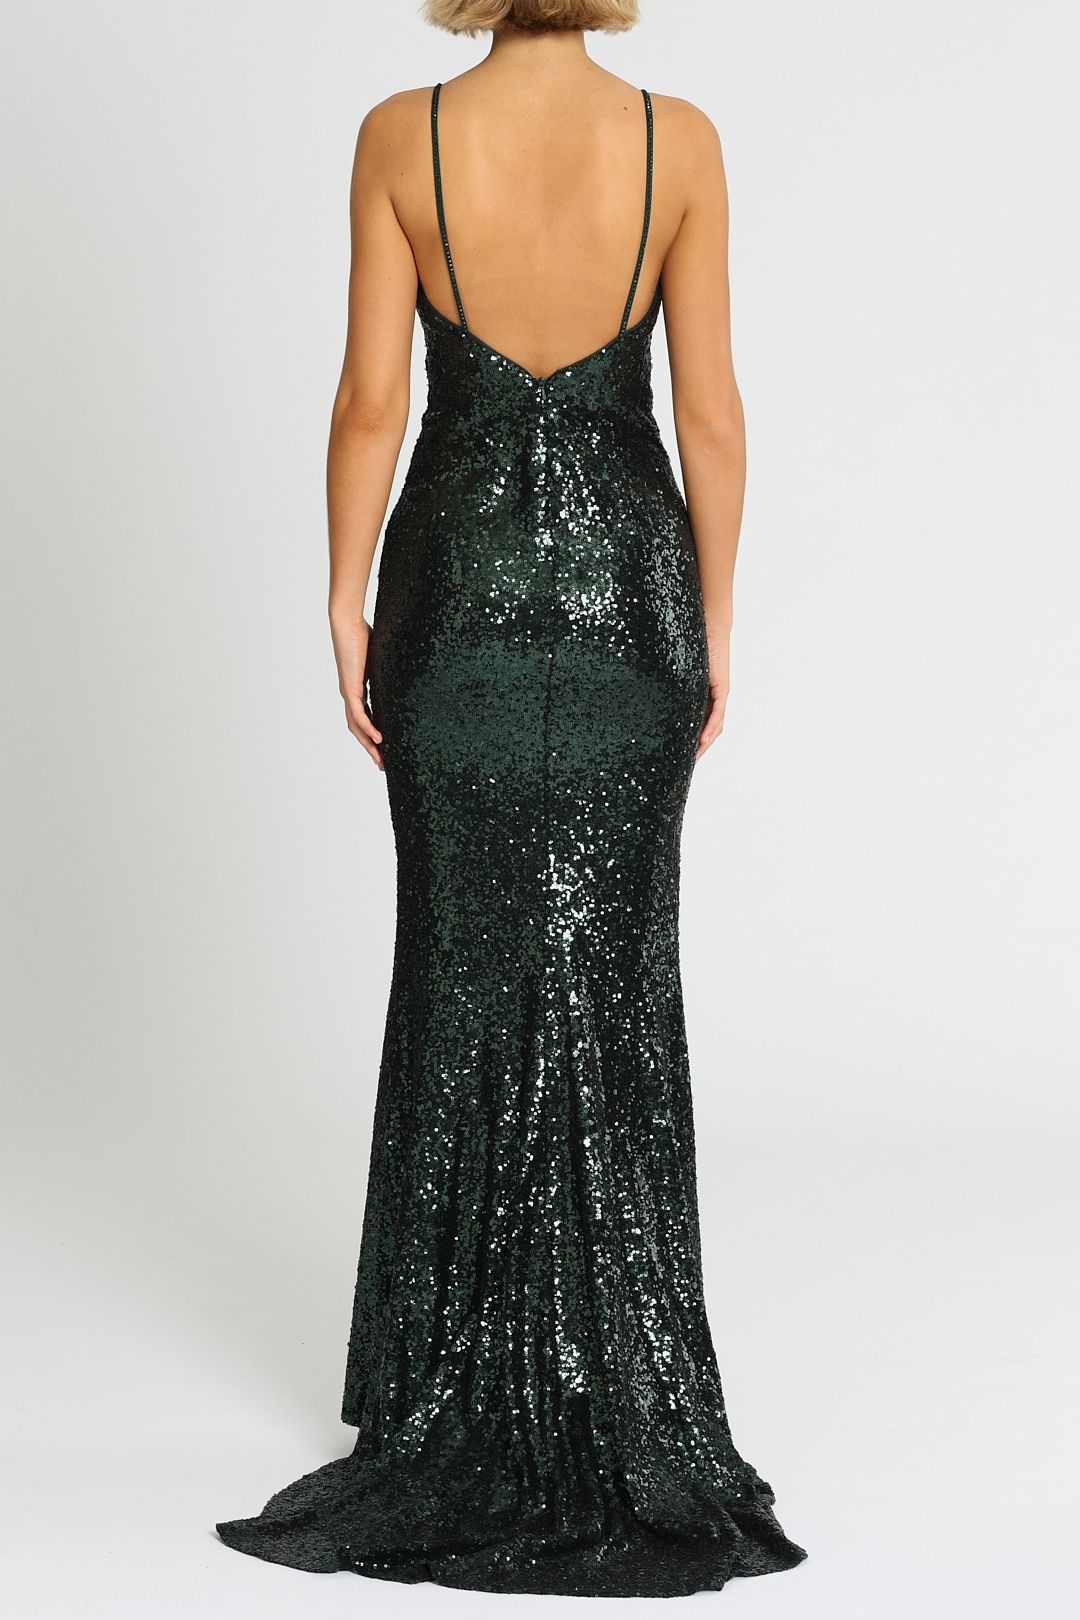 L'amour Sequin Plunge Emerald Green Sleeveless